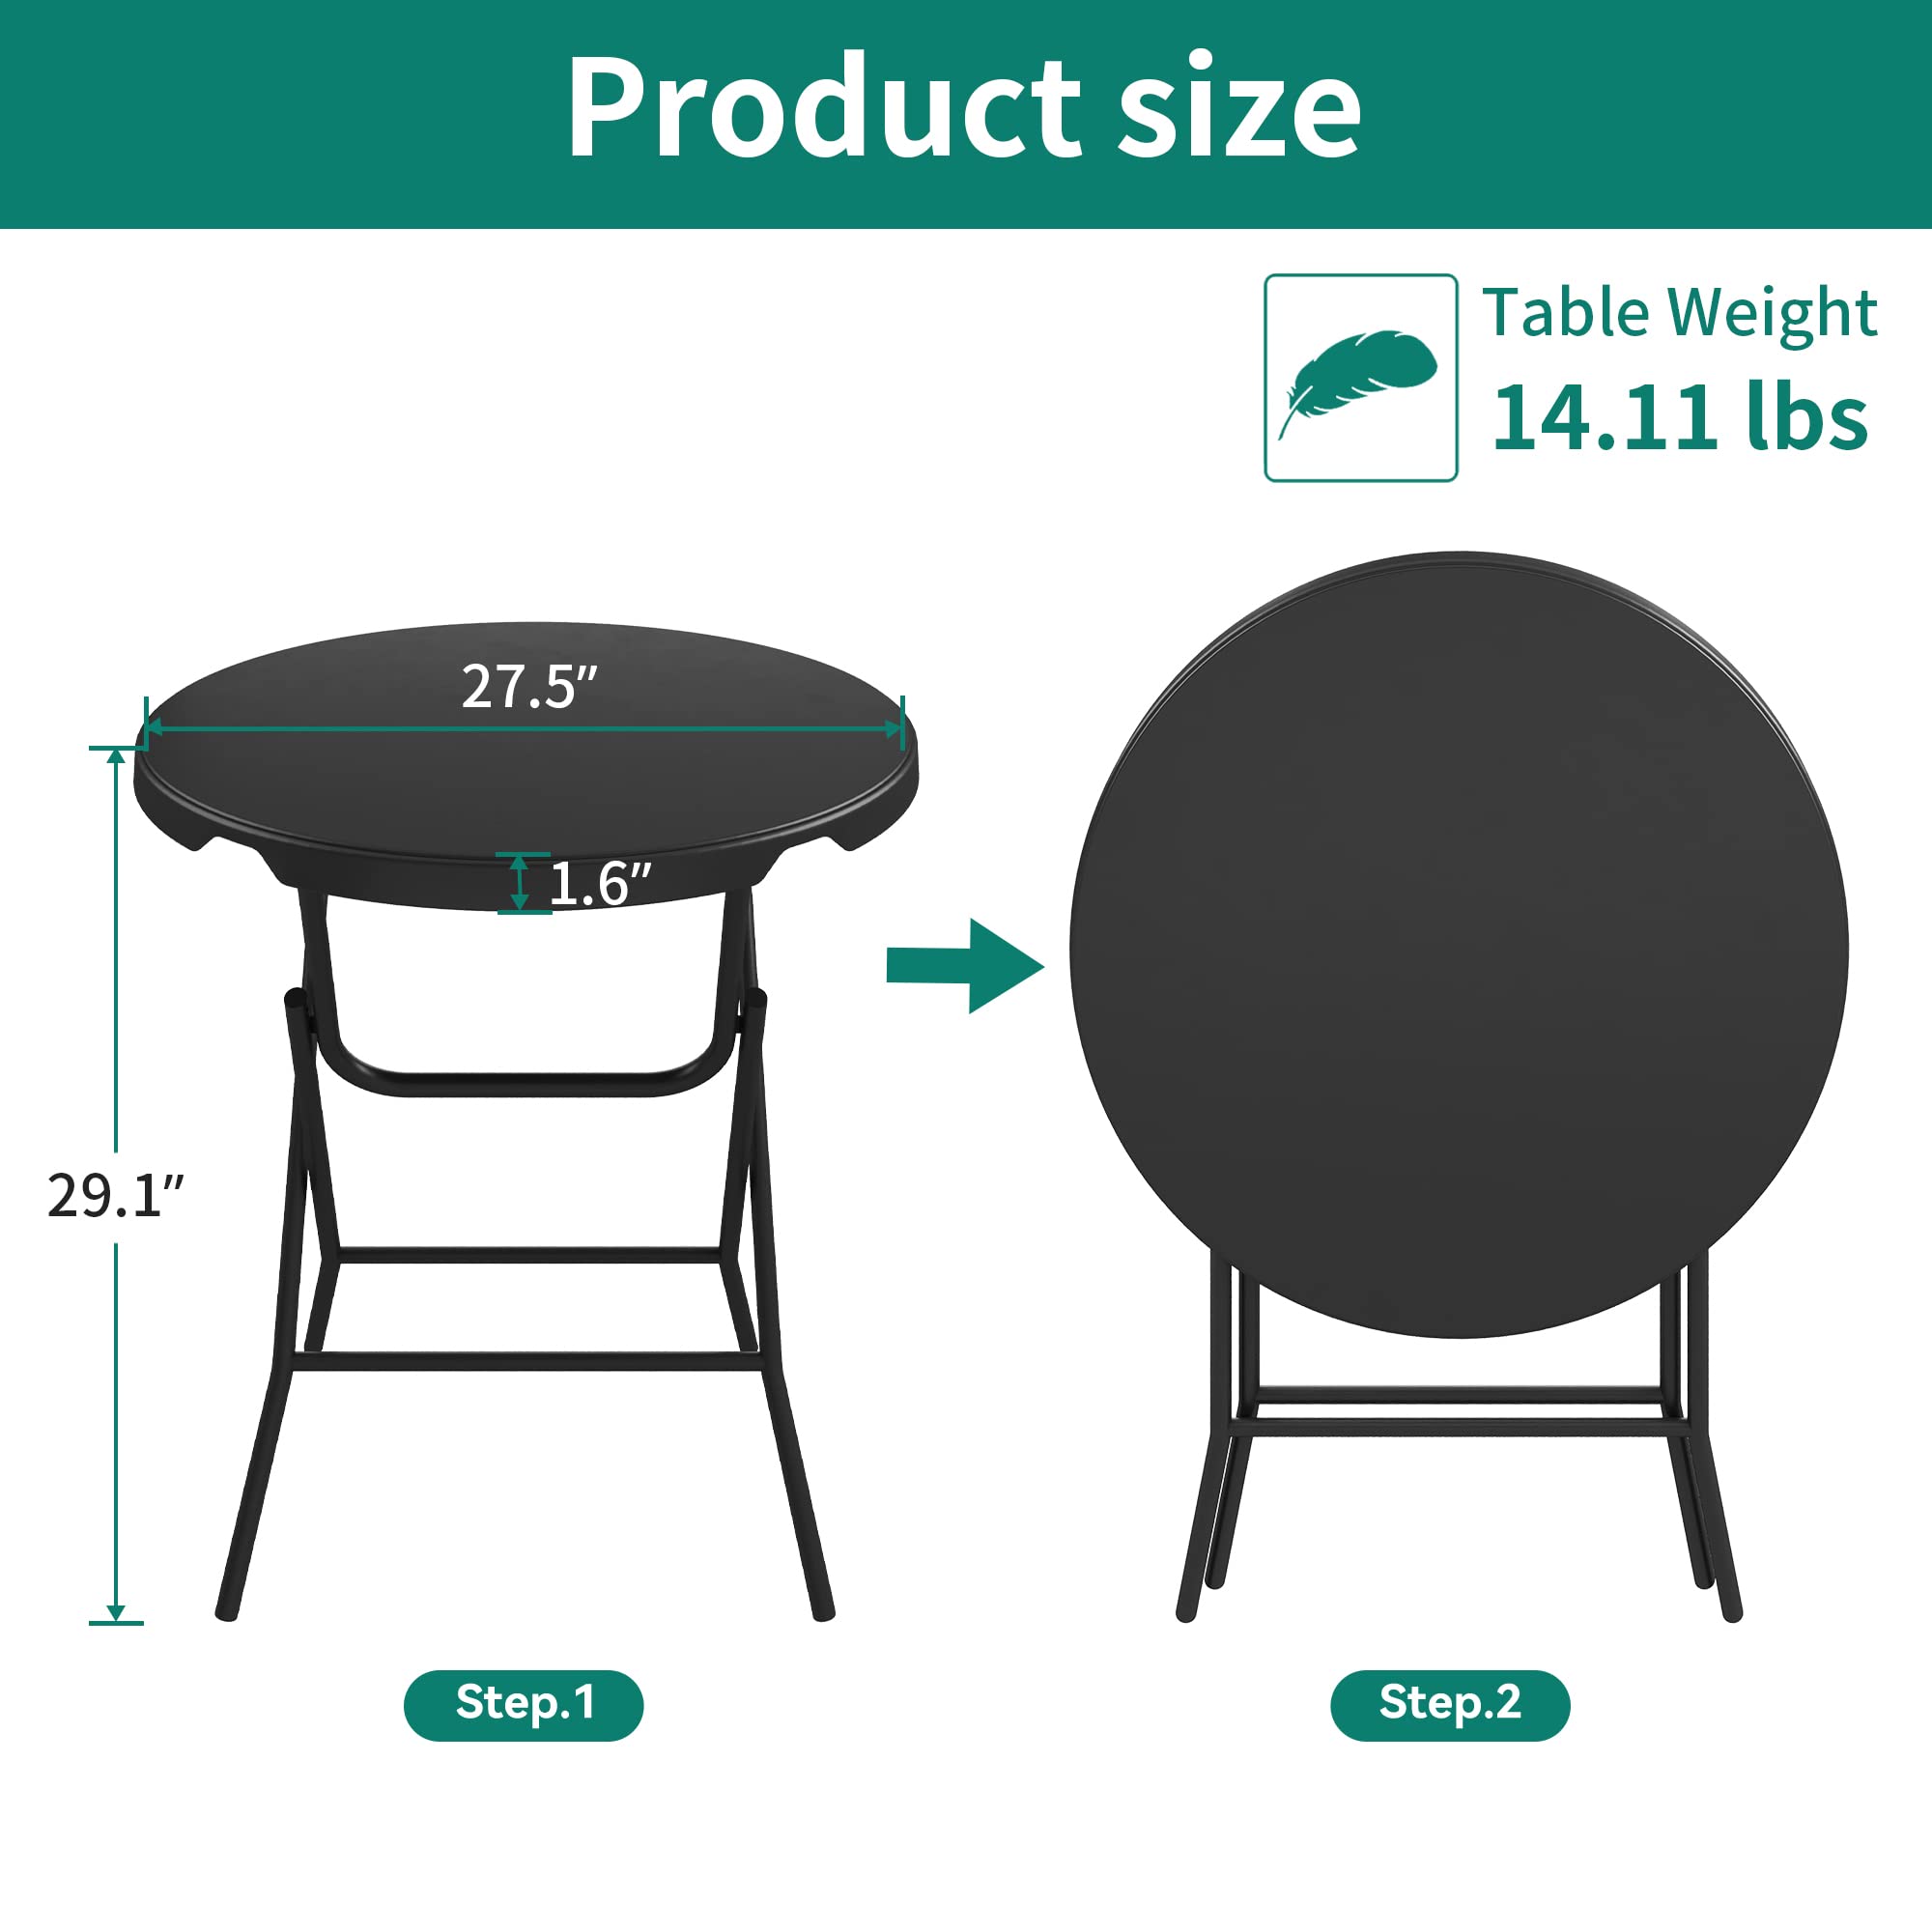 YITAHOME 32 Inch Round Folding Table for Outdoor/Indoor, Lightweight Foldable Table w/Thick Table Top and Sturdy Metal Frame, Ideal for Patio Backyard Dining Room Events, Black